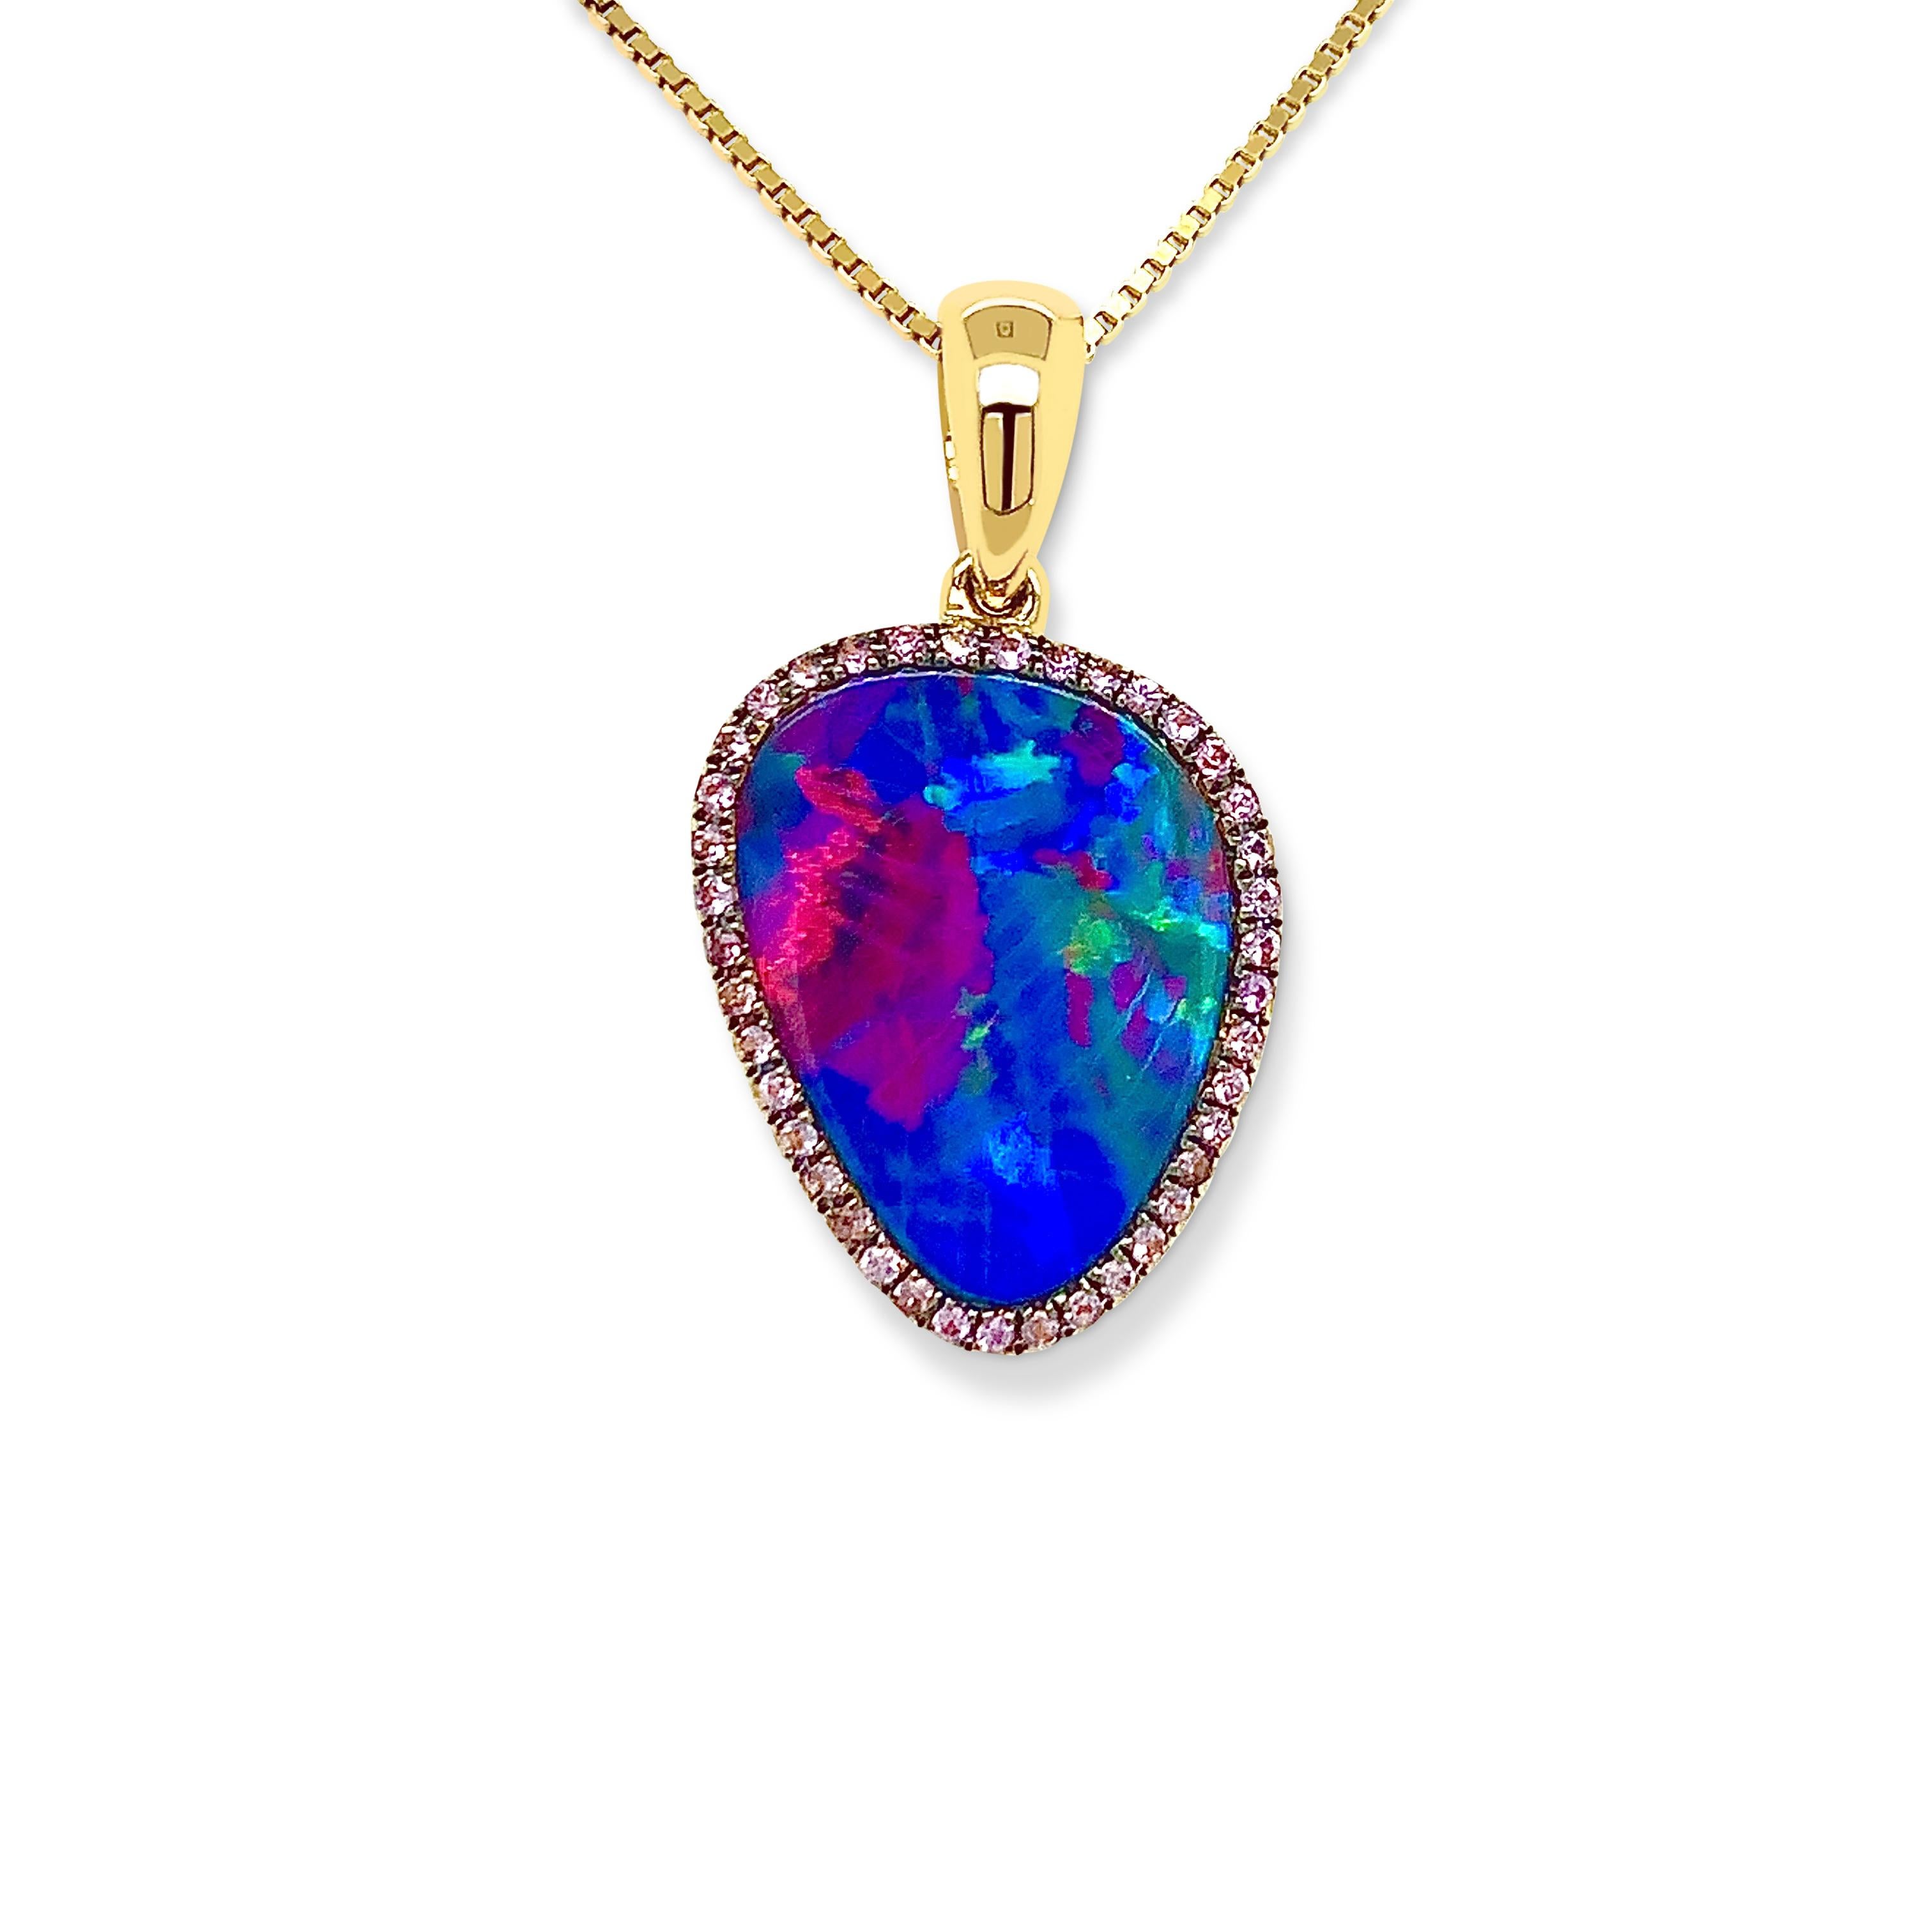 'Rose of My Heart' shows a premium quality Australian opal doublet (4.87ct) that features a unique red and blue play-of-colour, reminiscent of the rarest of opals. Crafted in 18K yellow gold with a rim of sparkling purple diamonds. This opal pendant